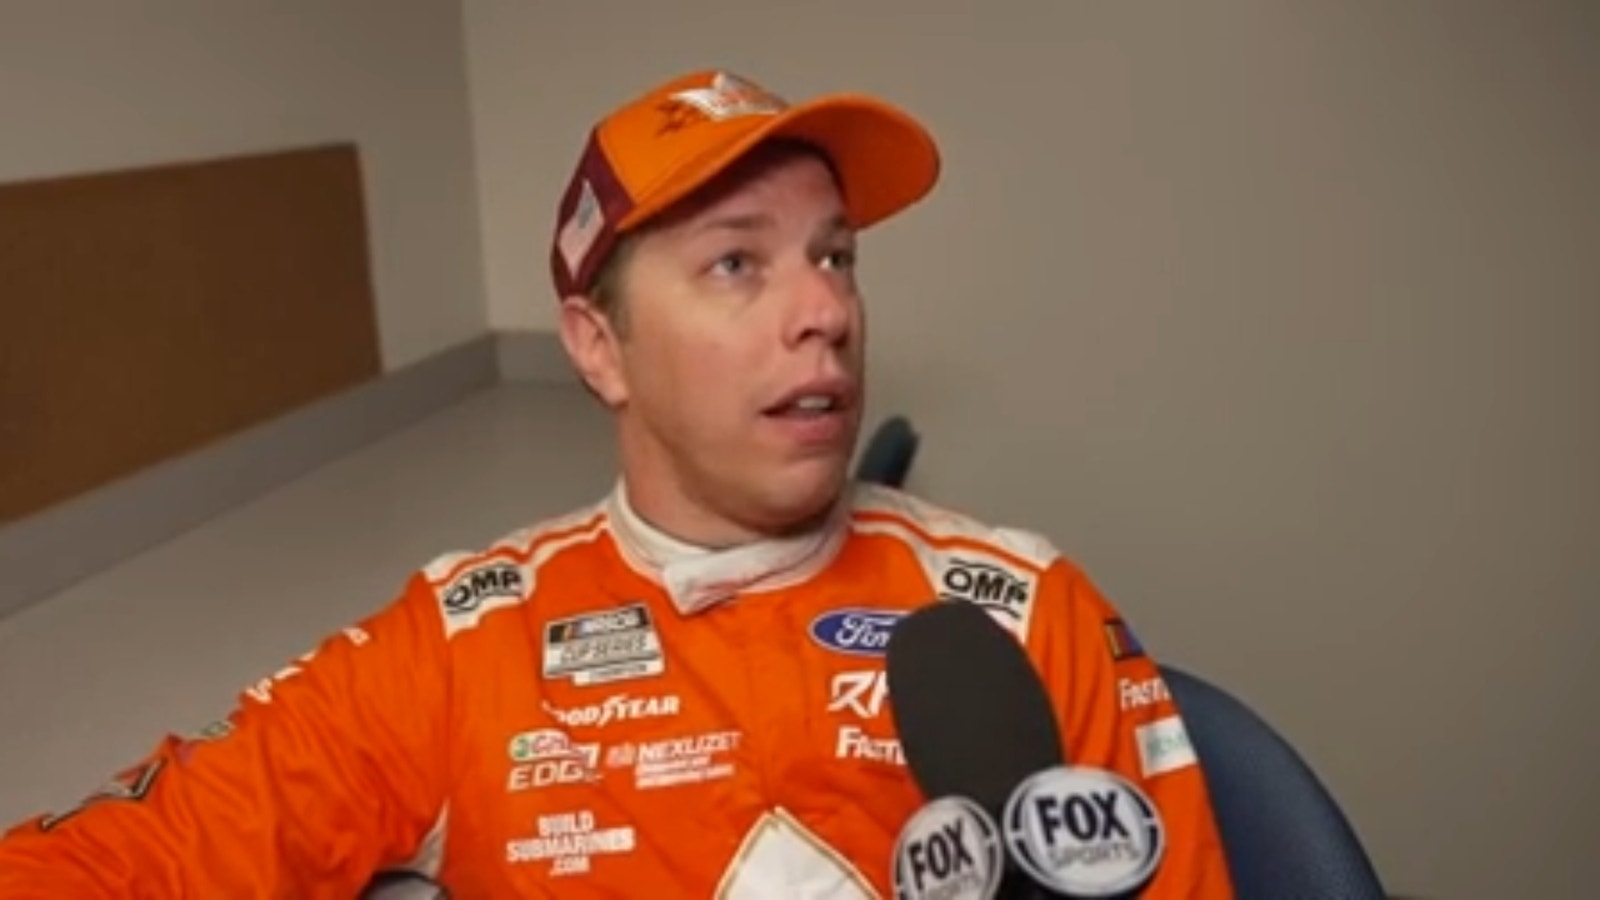 Brad Keselowski on Chris Buescher's win last week and his own momentum going into playoffs